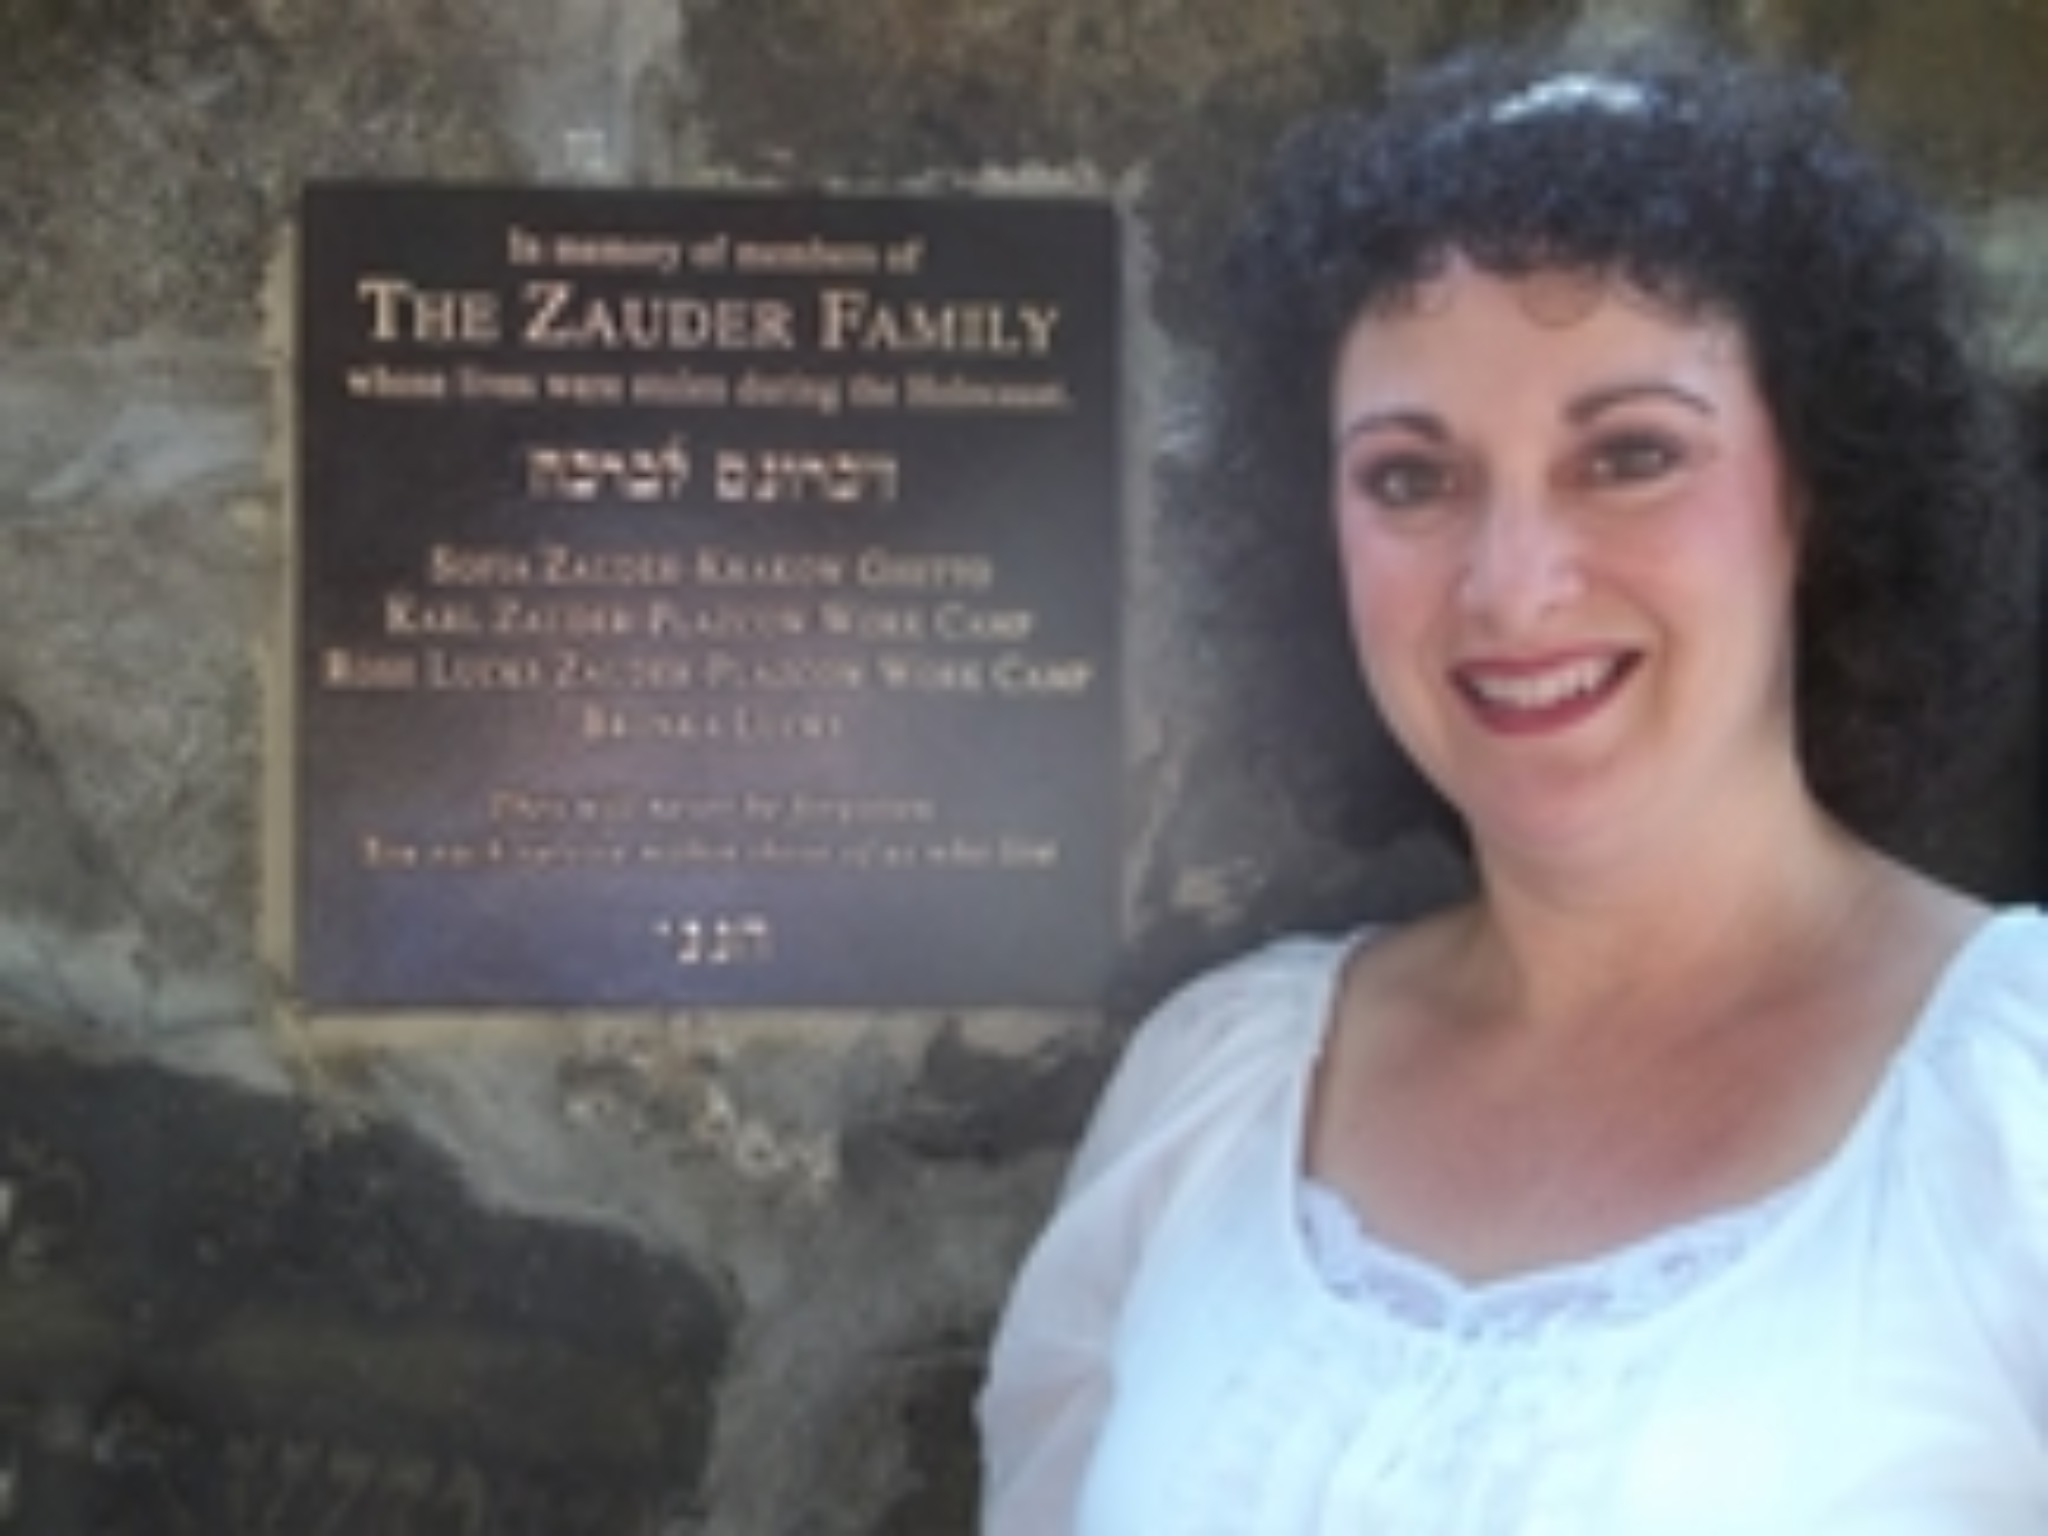 I had the honor and privilege of having my Family's Memorial Plaque placed in the New Jewish Midowa Cemetery in Krakow, Poland. The President of The Jewish Community of Krakow, Tadeusz Jakubowicz, arranged it for me! He also met with me and helped me research family history.